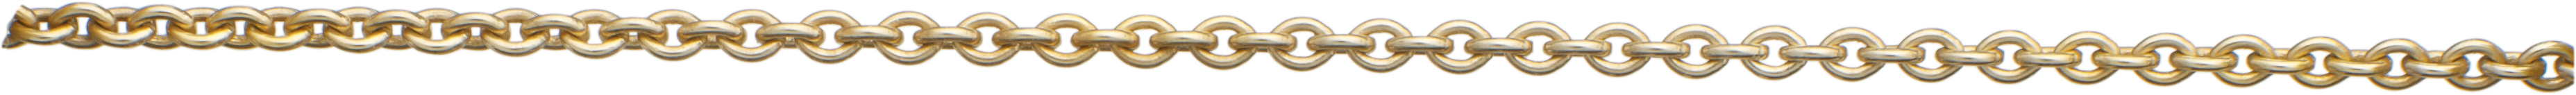 Anchor chain round gold 750/- 1.50mm, wire thickness 0.40mm